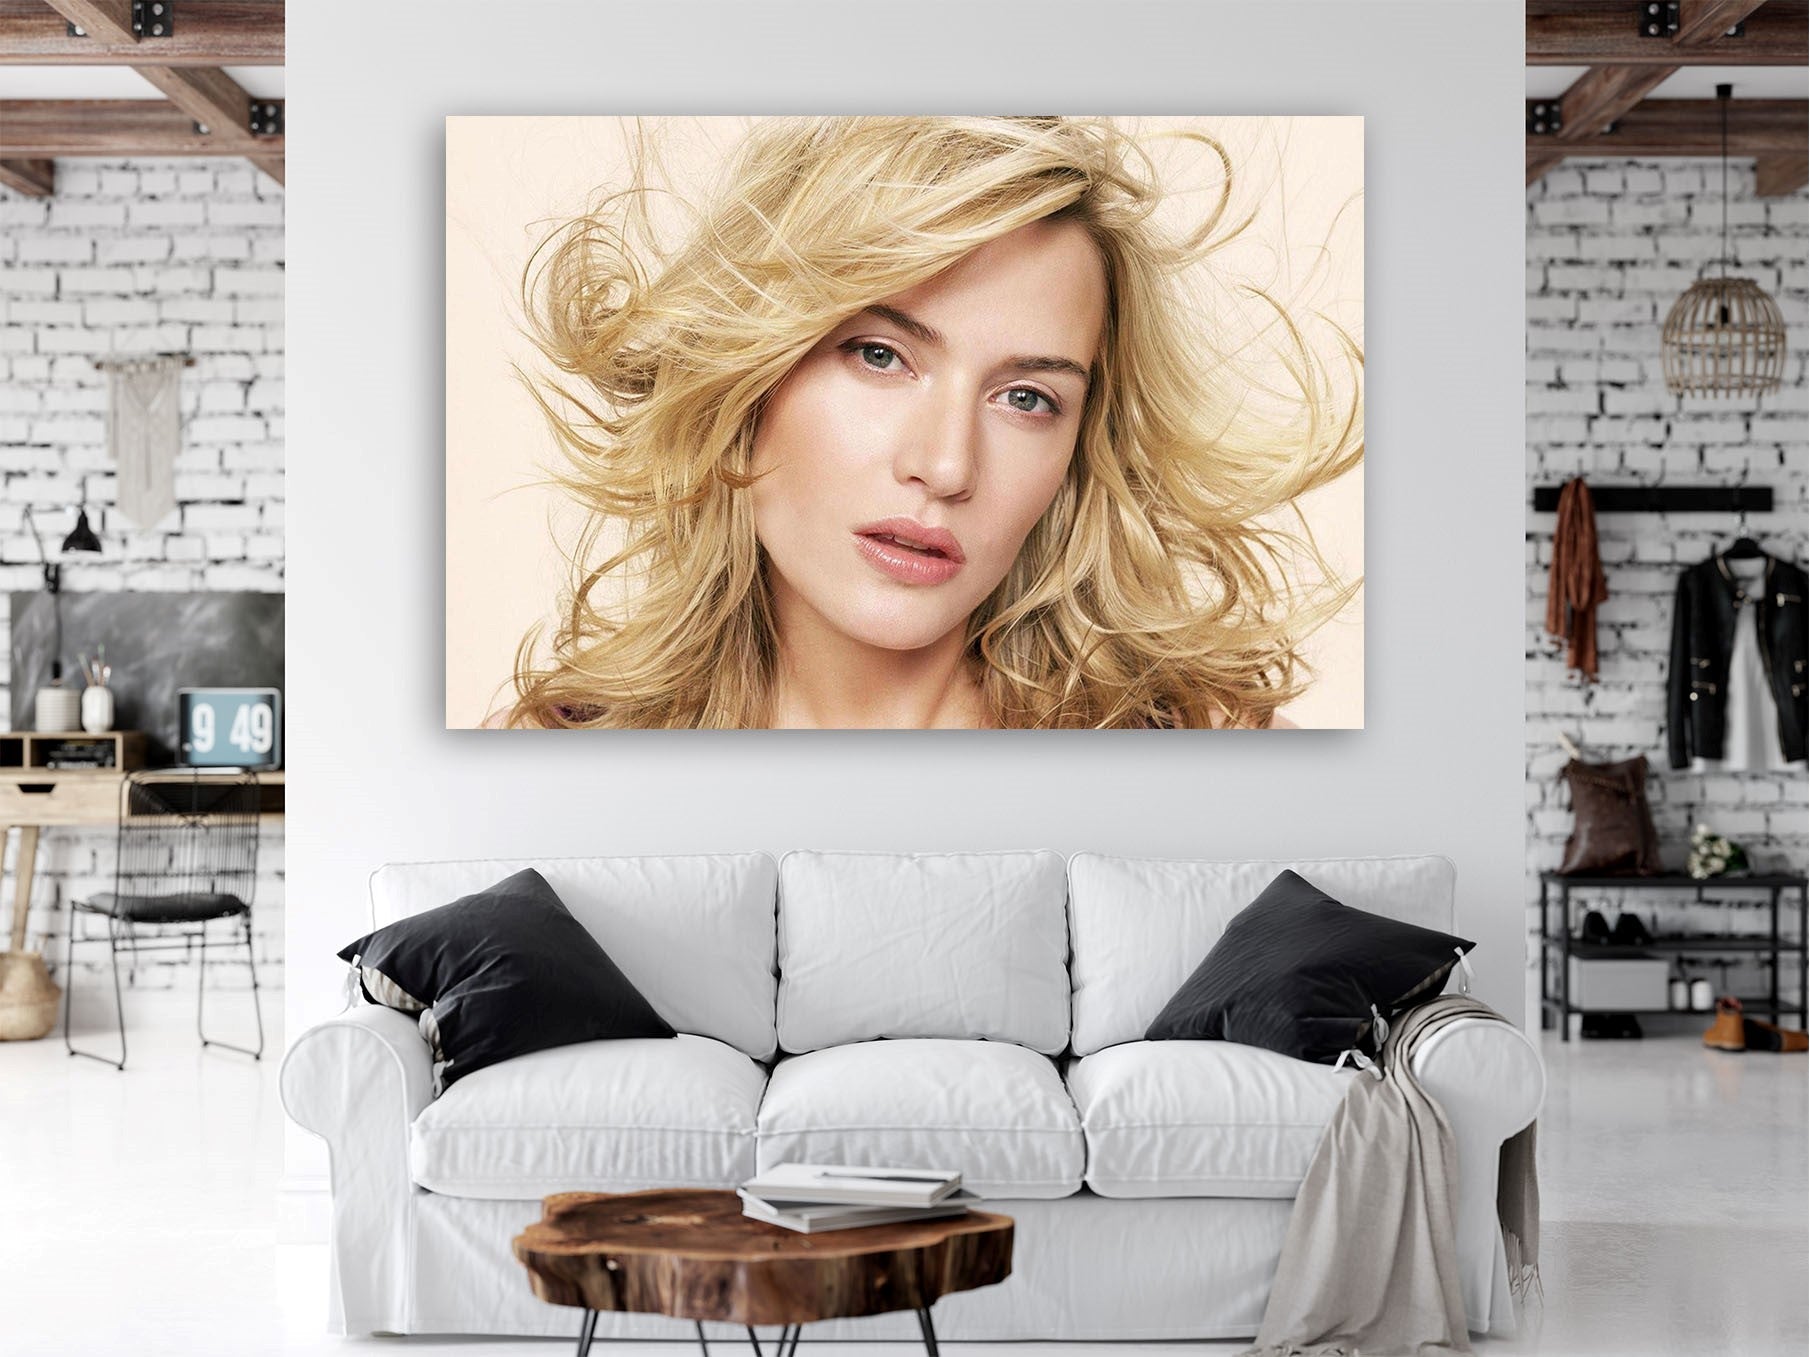 Kate Winslet On Sofa Images Wallpapers